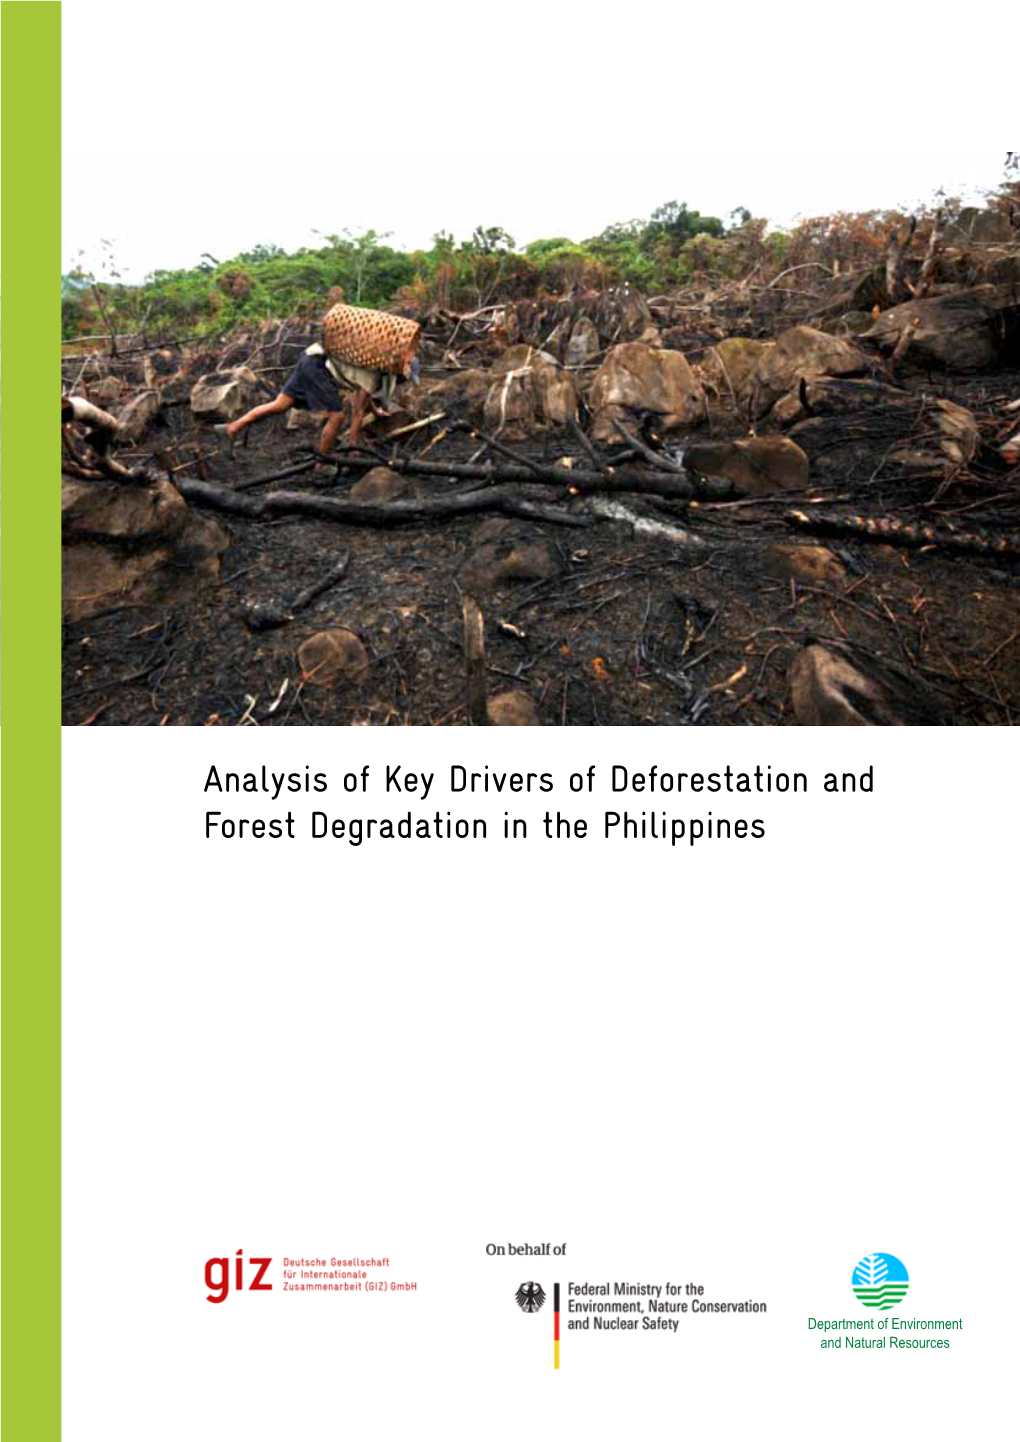 Analysis of Key Drivers of Deforestation and Forest Degradation in the Philippines